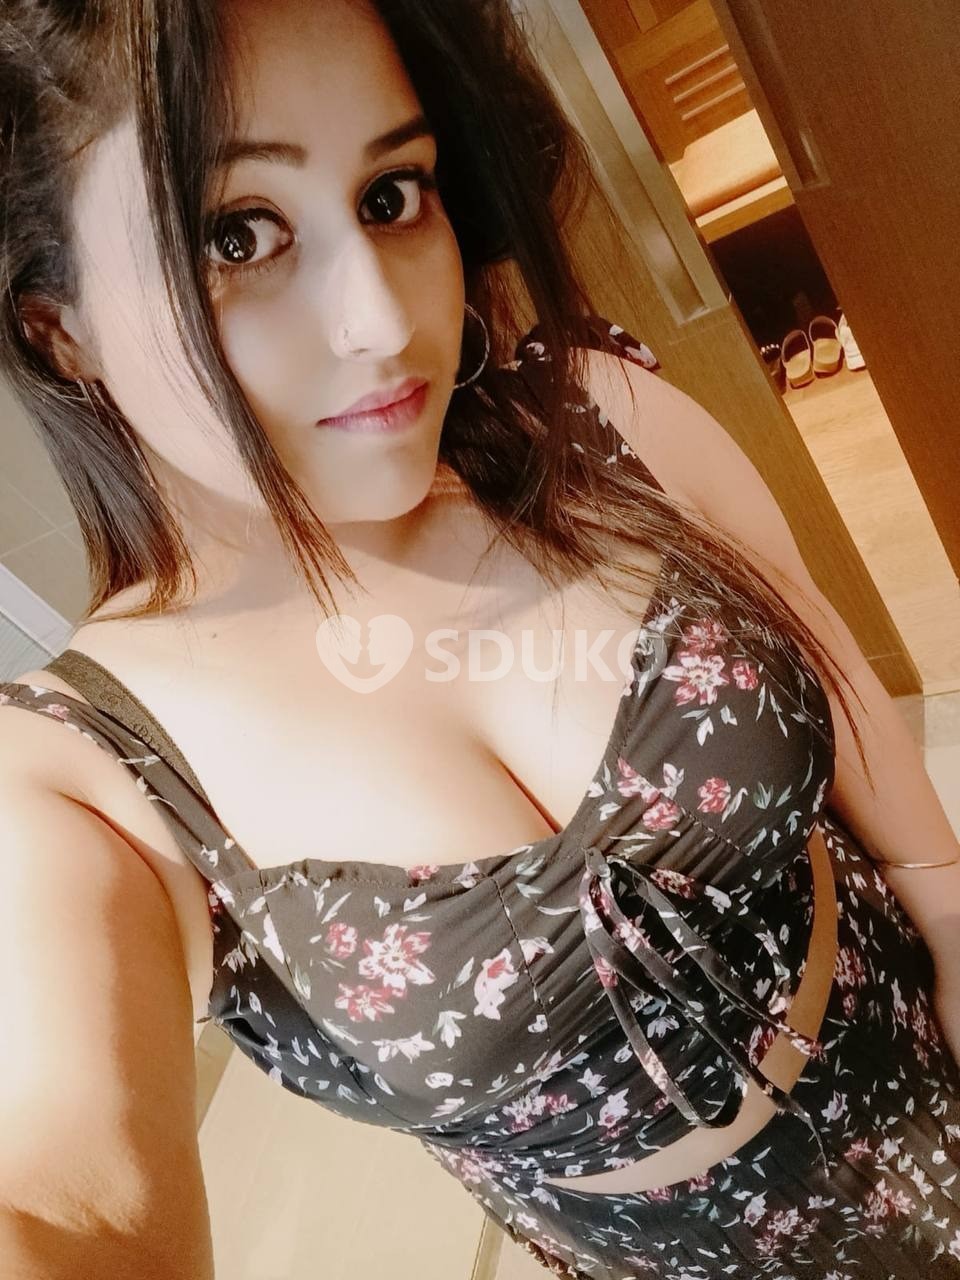 SAKET... 😍 HOME AND HOTEL SERVICE AVAILABLE FULL SAFE AND SECURE SERVICE AVAILABLE HETAL 21